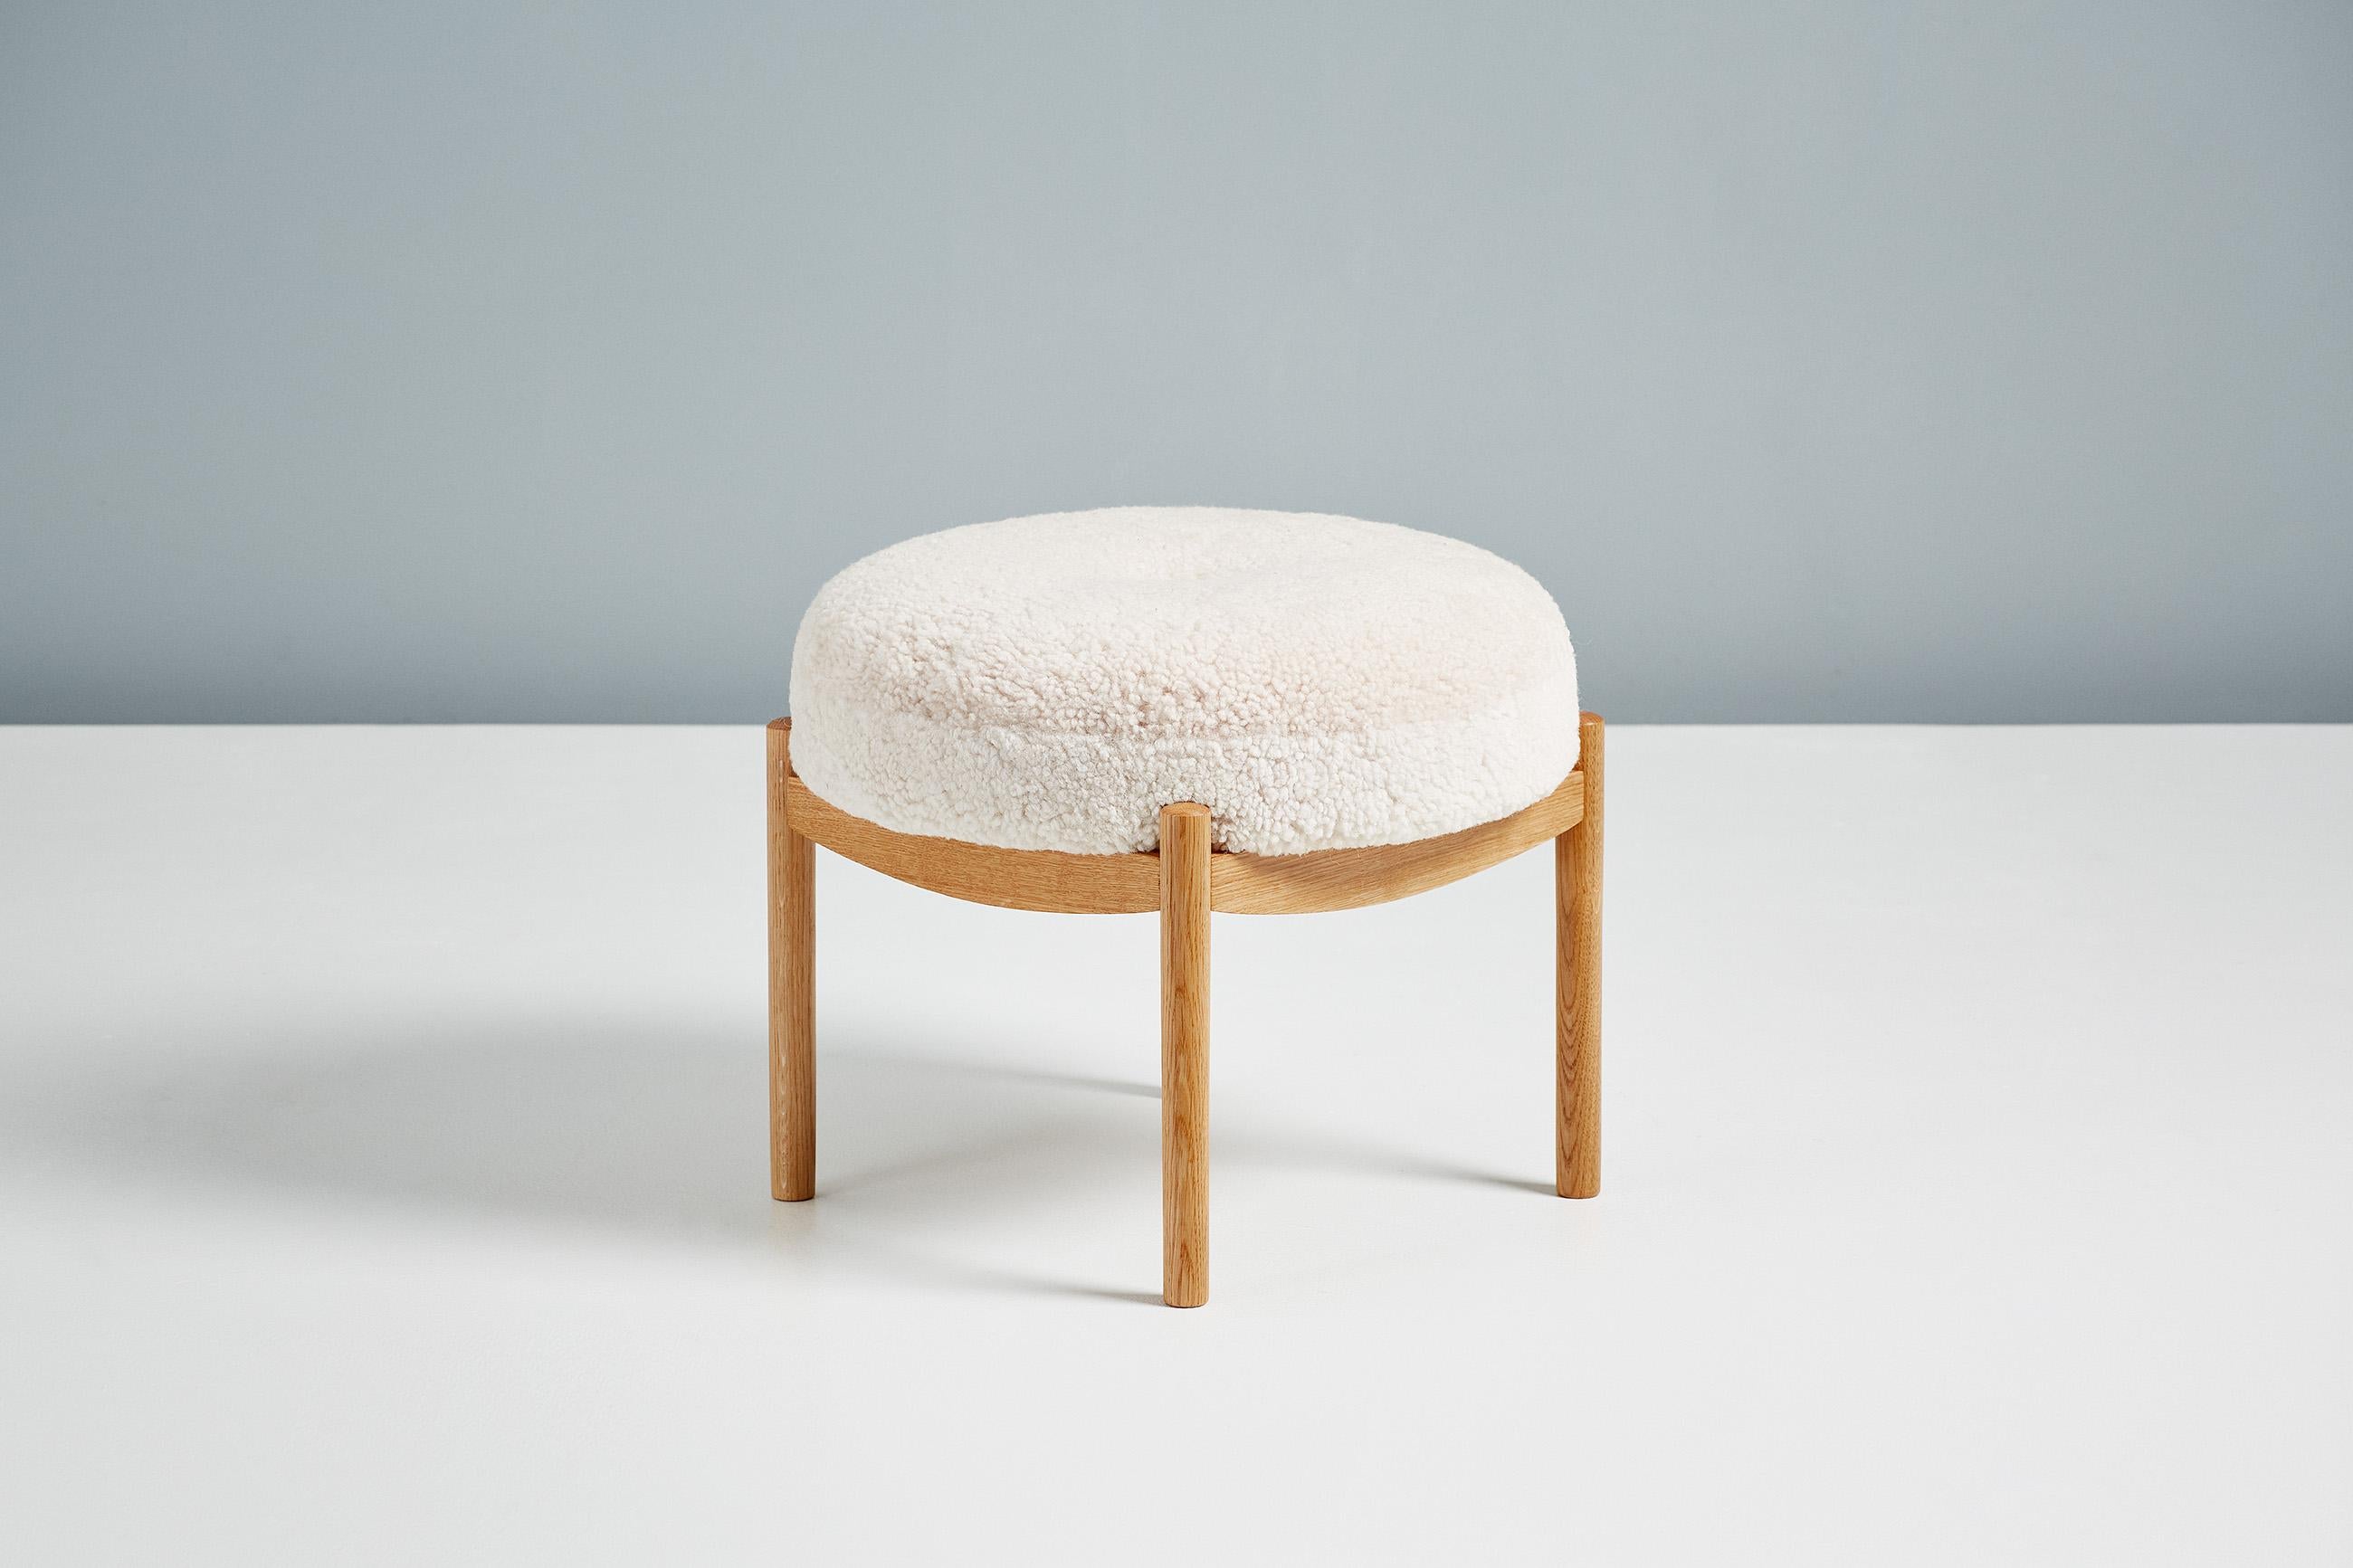 Dagmar Design

Blek Ottoman

A custom-made round ottoman with solid wood frame developed & produced at our workshops in London. These examples have frames in oiled oak with seats upholstered in Moonlight sheepskin. Blek is available to order in